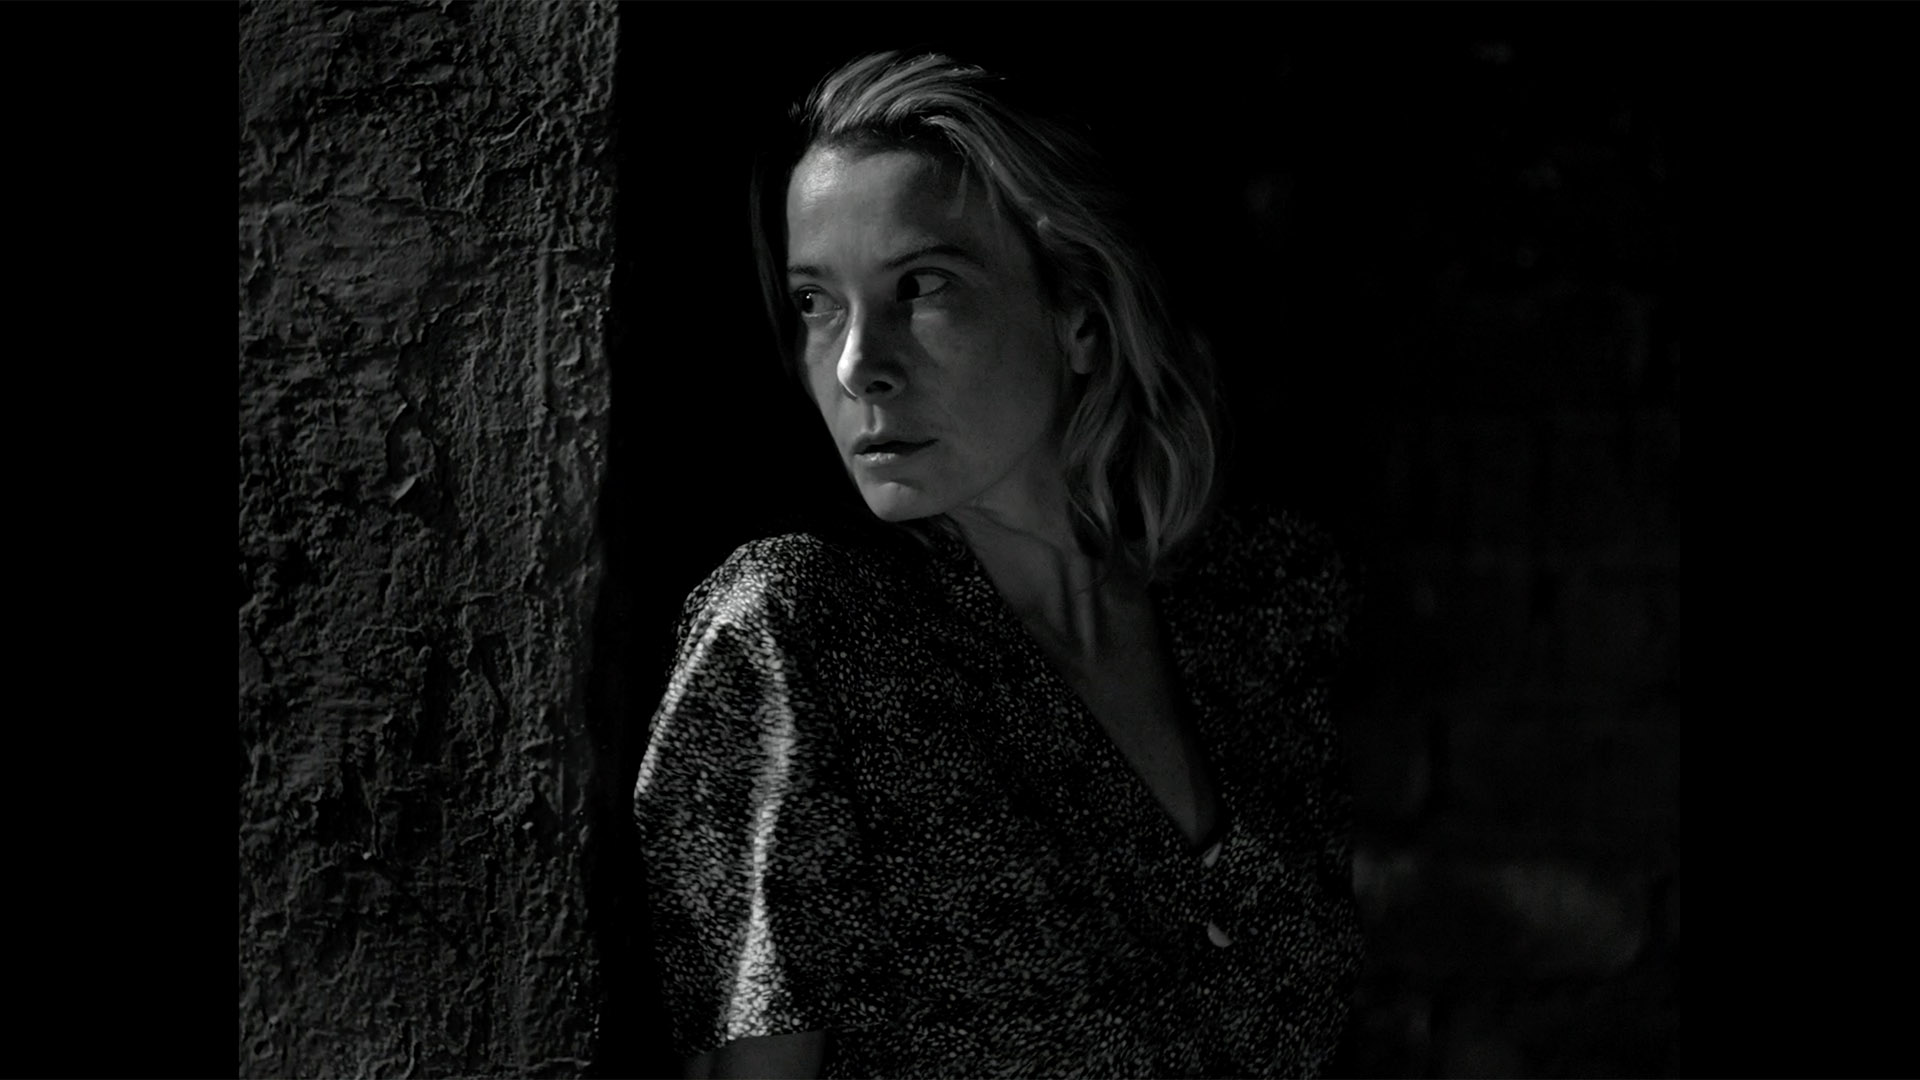 Trailer still frame from Dear Comrades, woman black and white